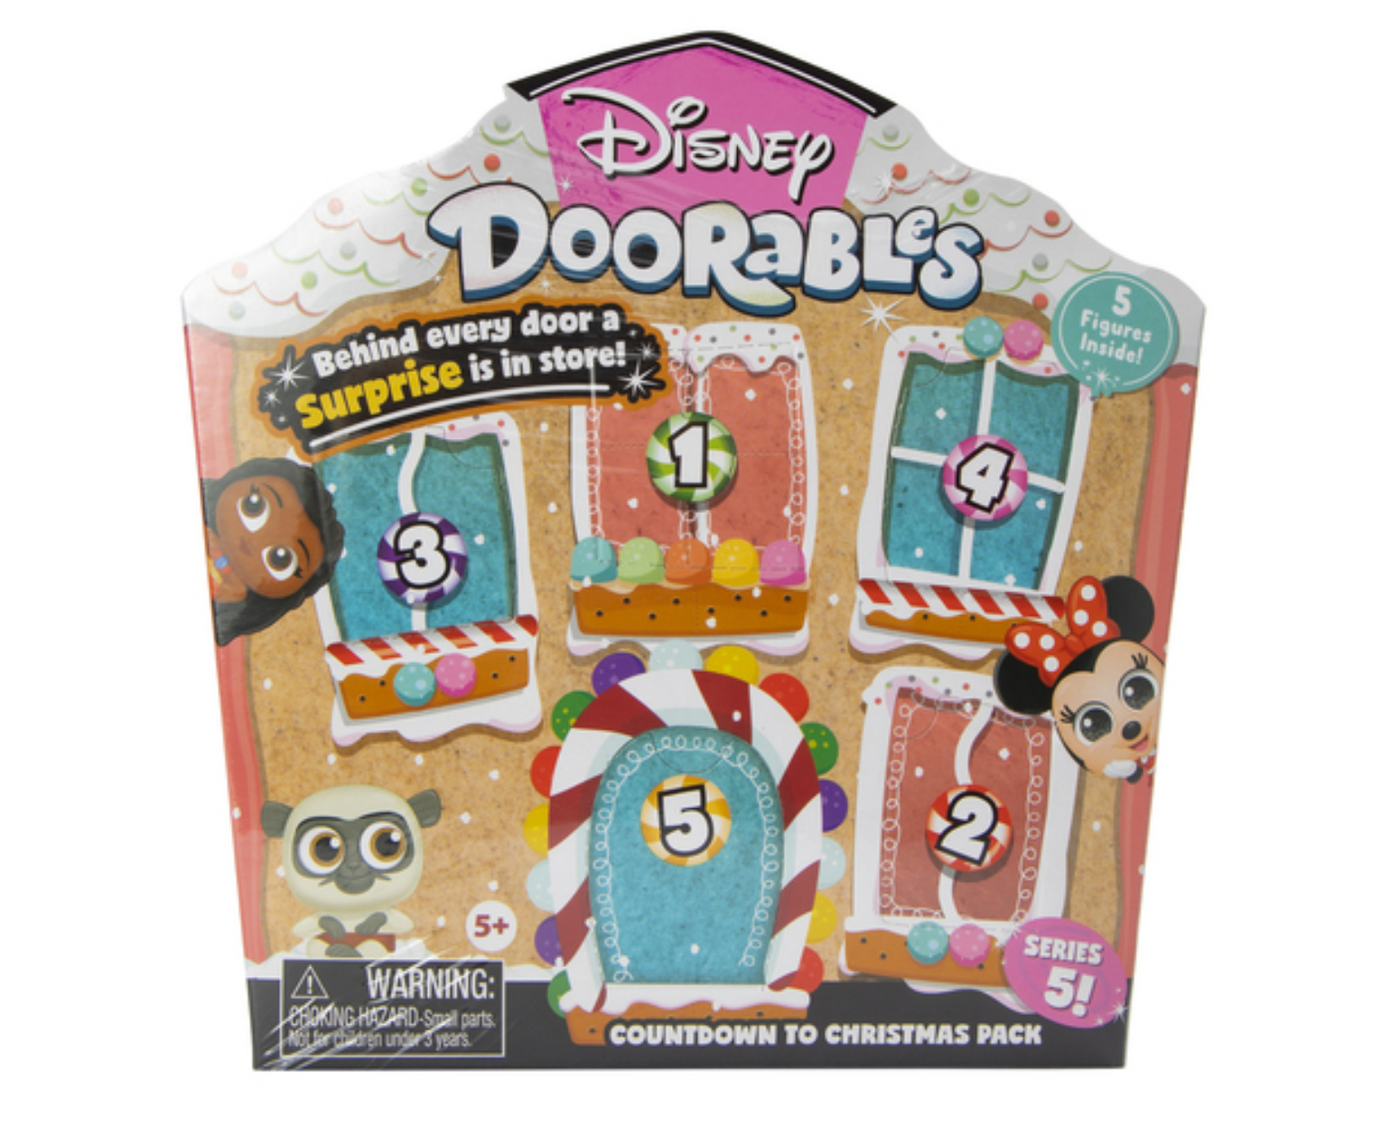 Disney Series 5 Doorables 5 Day Figures Countdown to Christmas Pack New with Box